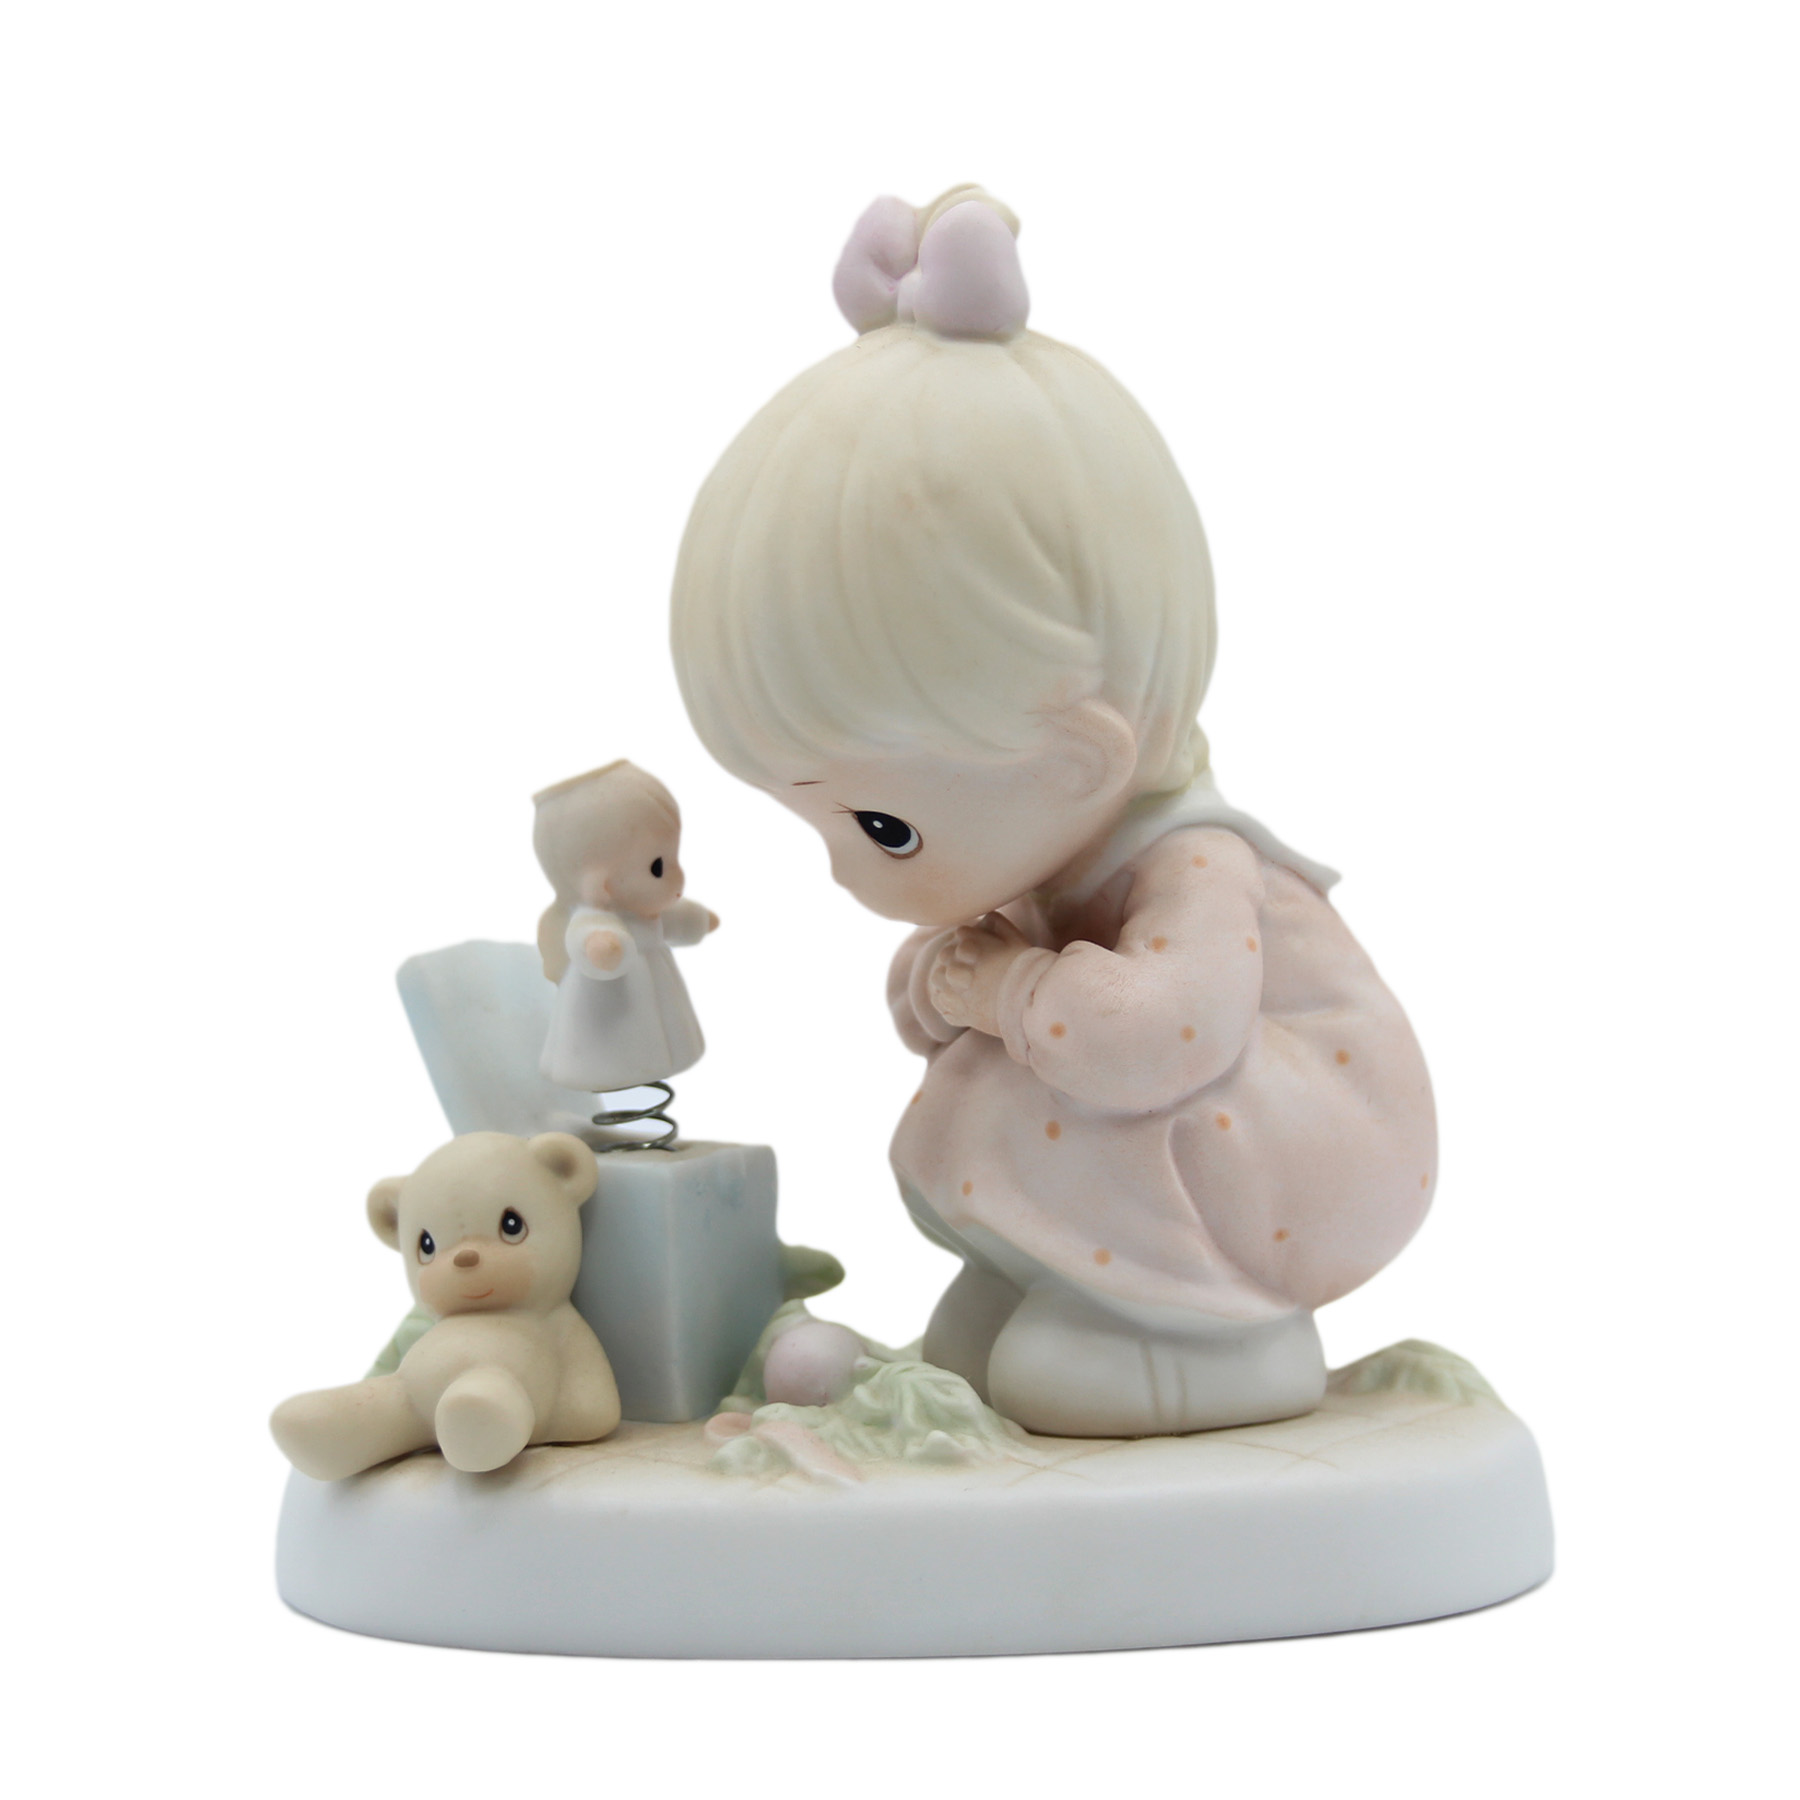 Precious Moments Figurine: 523755 Just Poppin' in to Say Halo! (5") - image 1 of 3